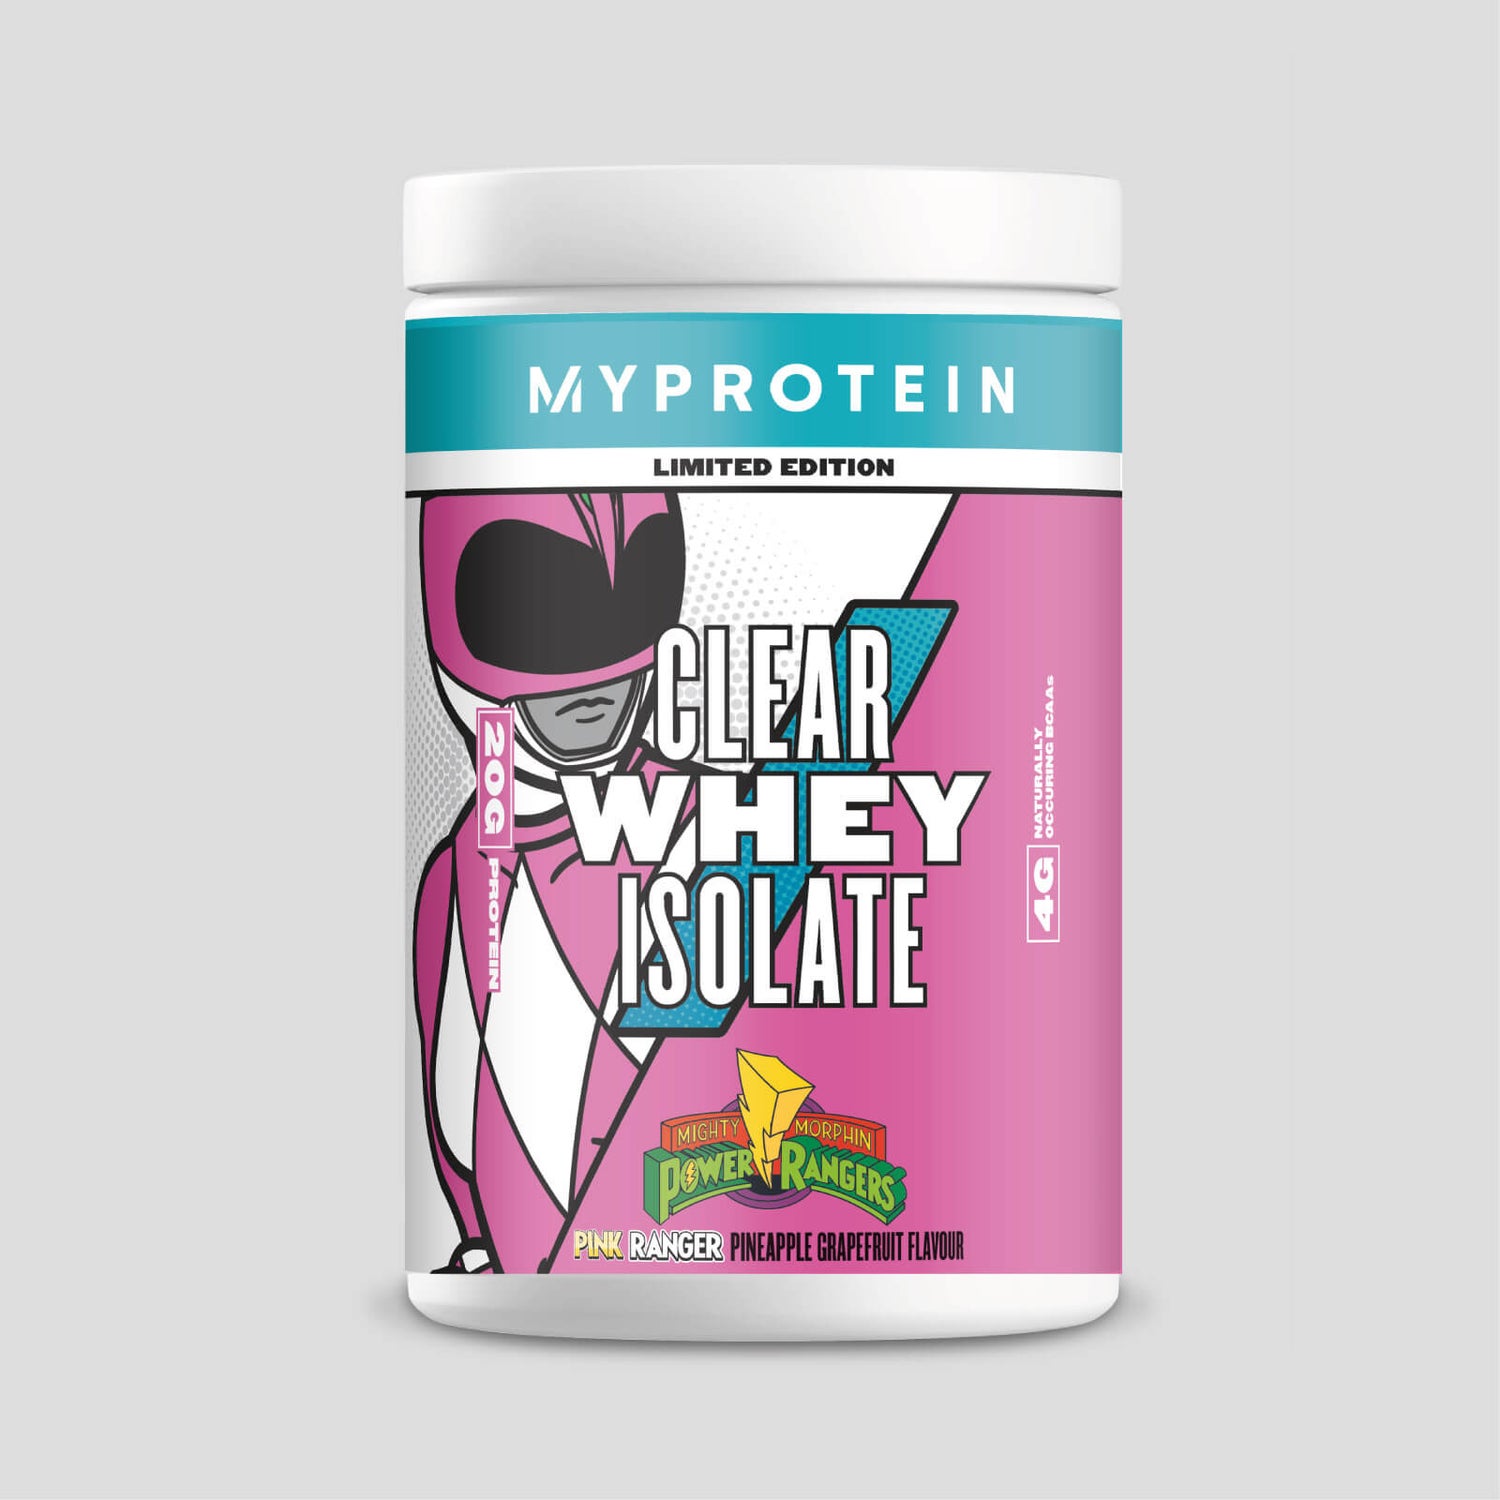 Myprotein Clear Whey Isolate, Pineapple Grapefruit, (PowerRangers), 20 Servings (ALT) (CEE)